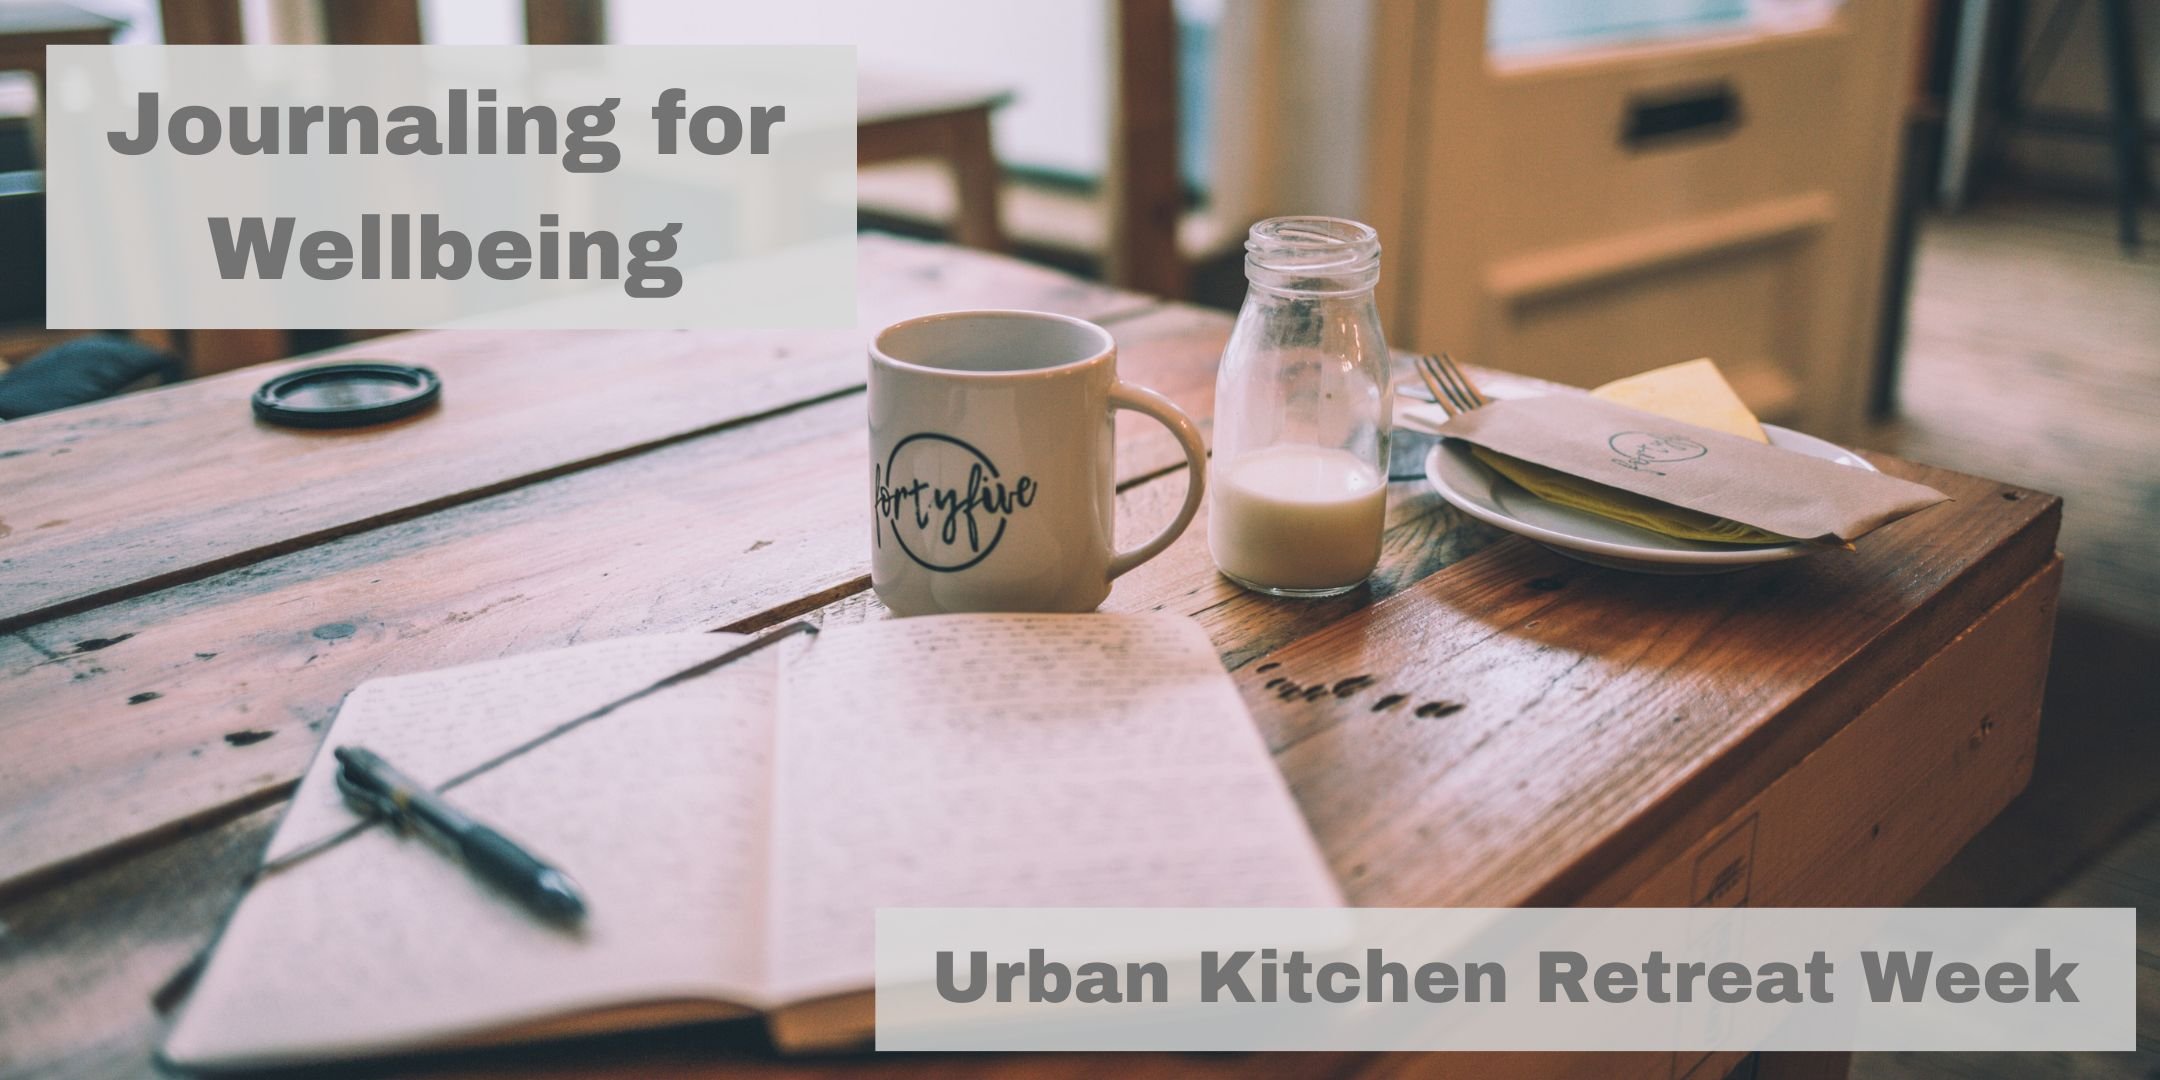 Journaling for Wellbeing at the Urban Retreat Week
